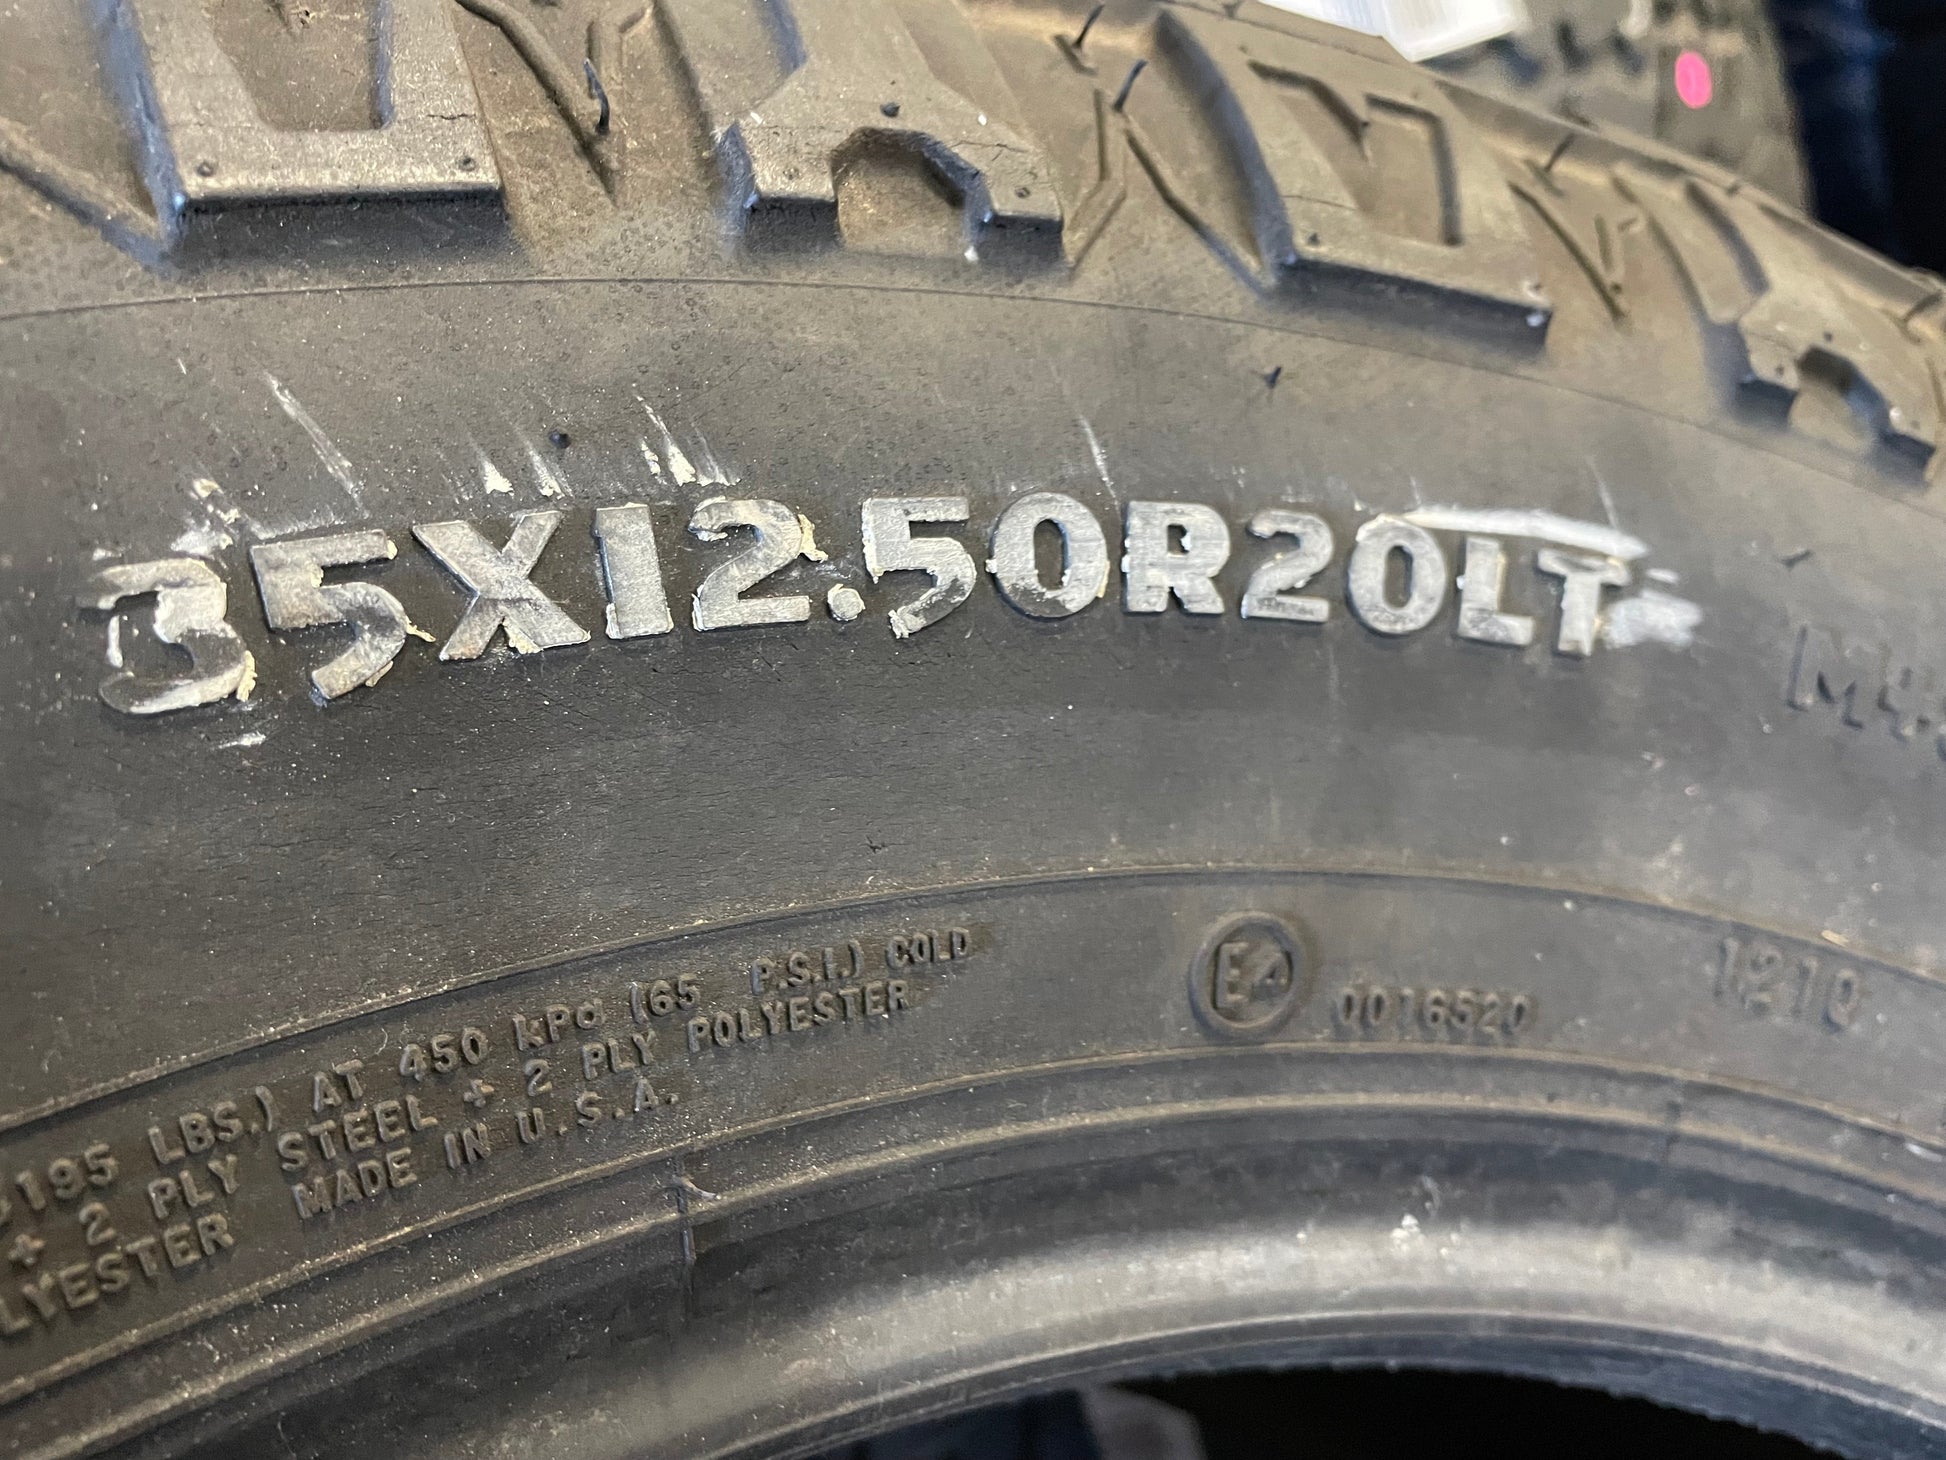 SINGLE 35x12.50R20 Wild Country Radial MTX 121 Q E - Used Tires